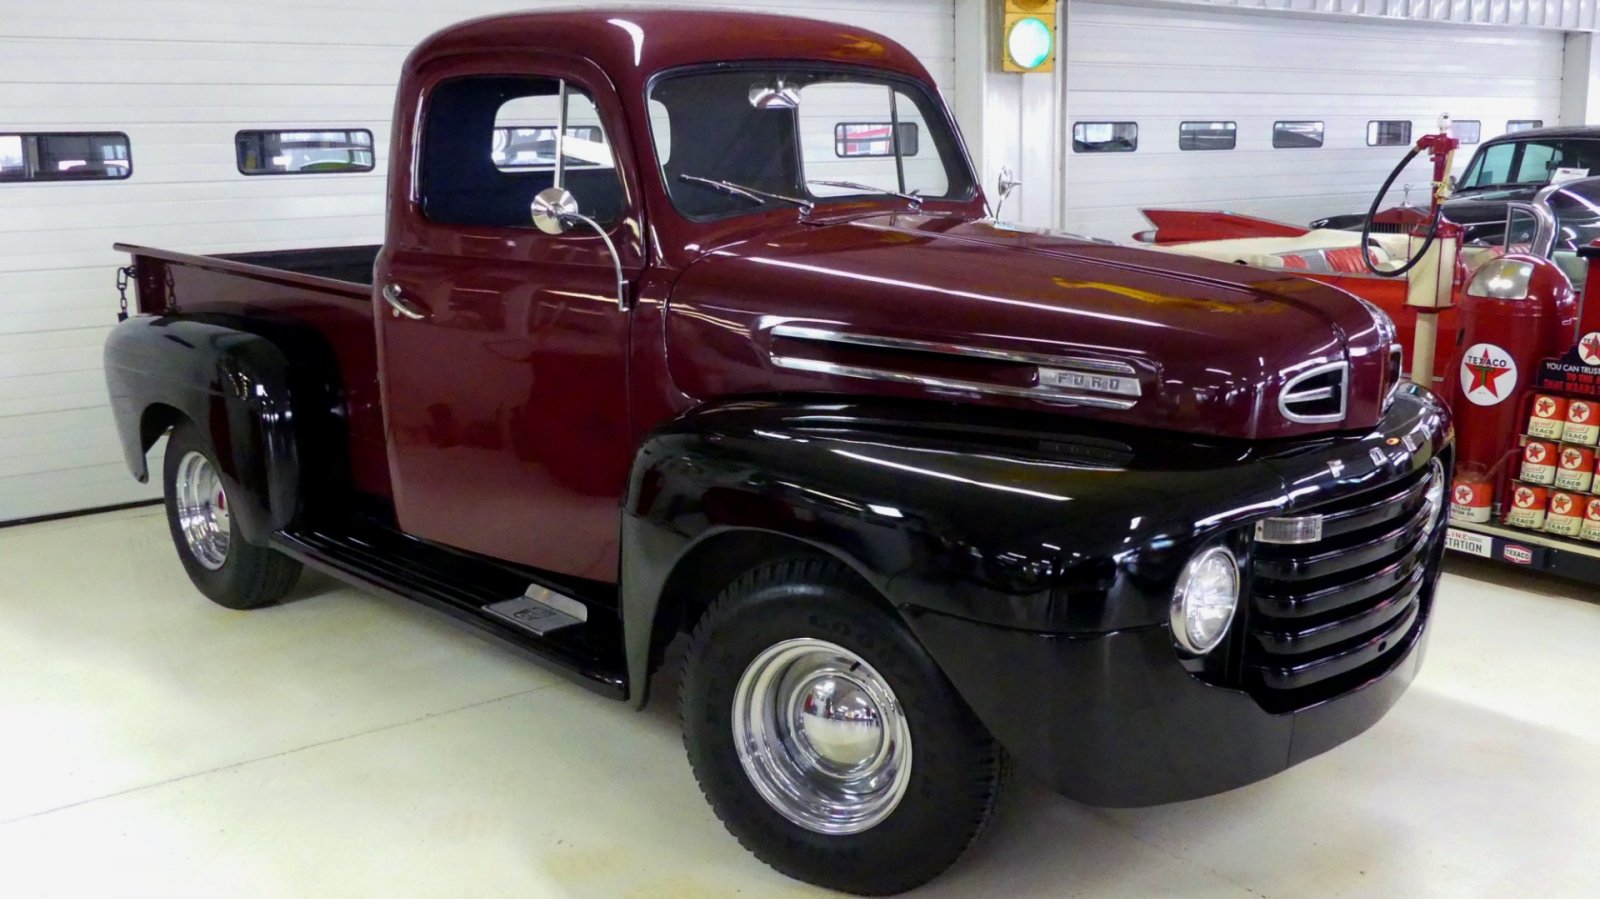 Icon of the Past: 1950 Ford F-1 Truck